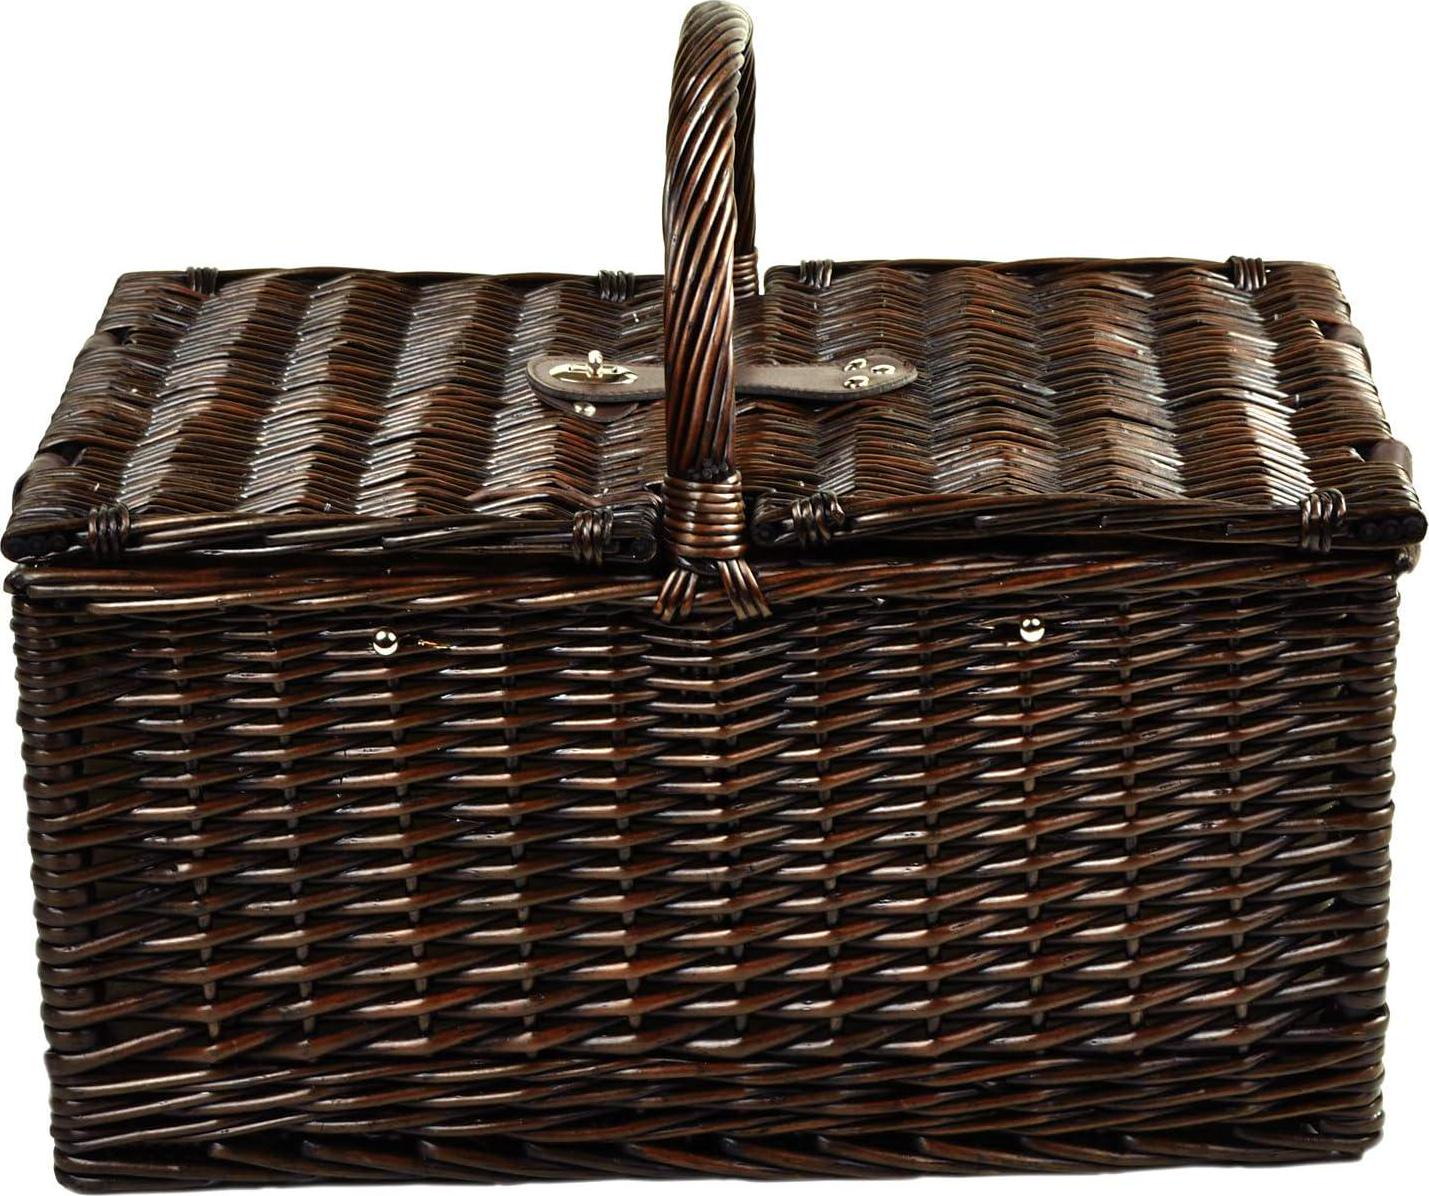 GIFTS PLAZA (D) Buckingham Picnic Basket for 4 Set for Outdoor (Brown)